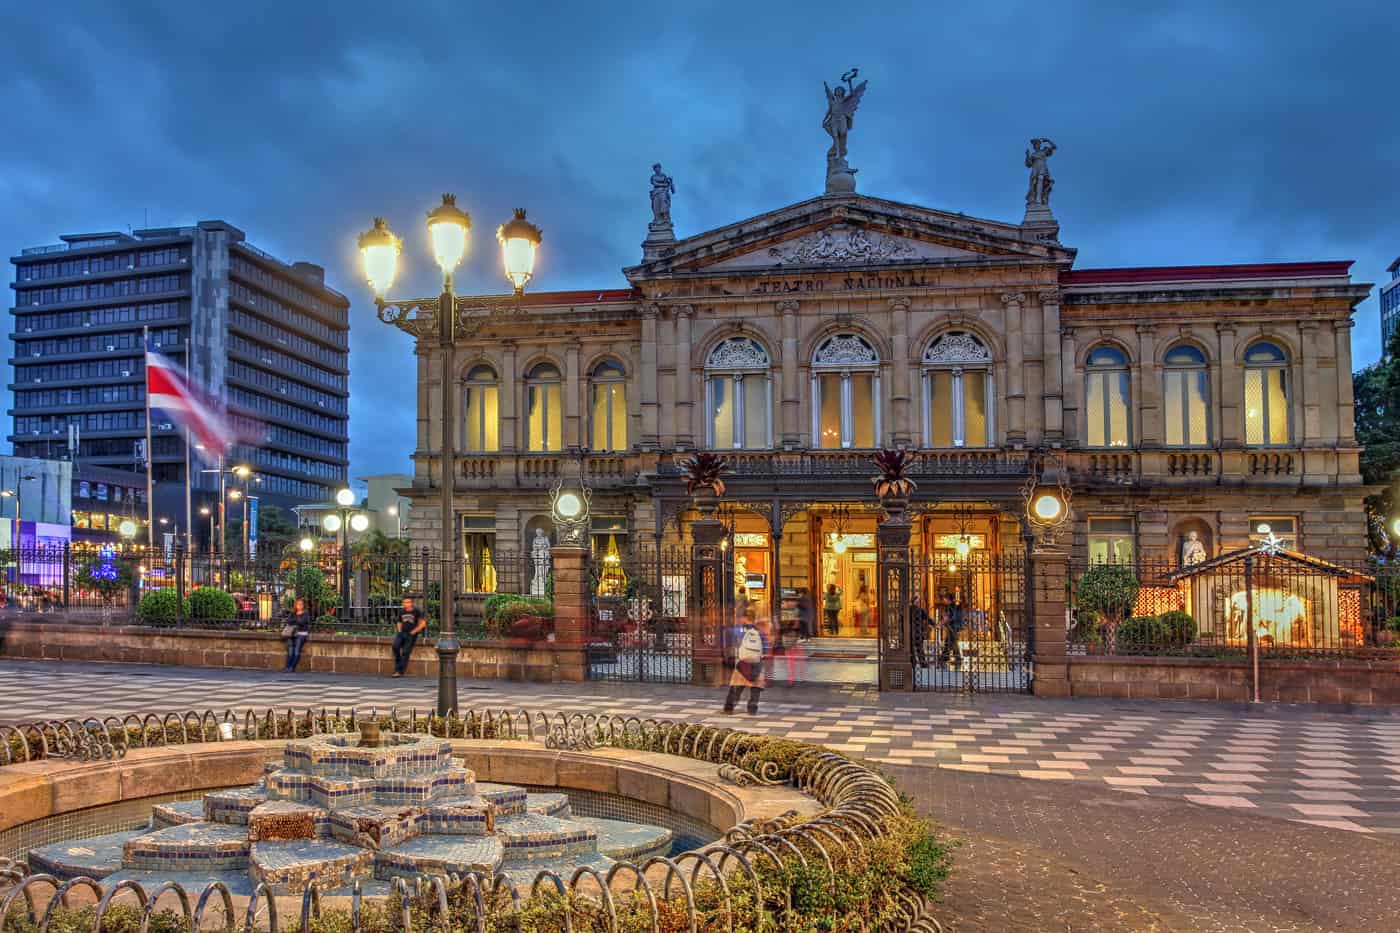 An old building with a fountain in the middle of a Costa Rican city.